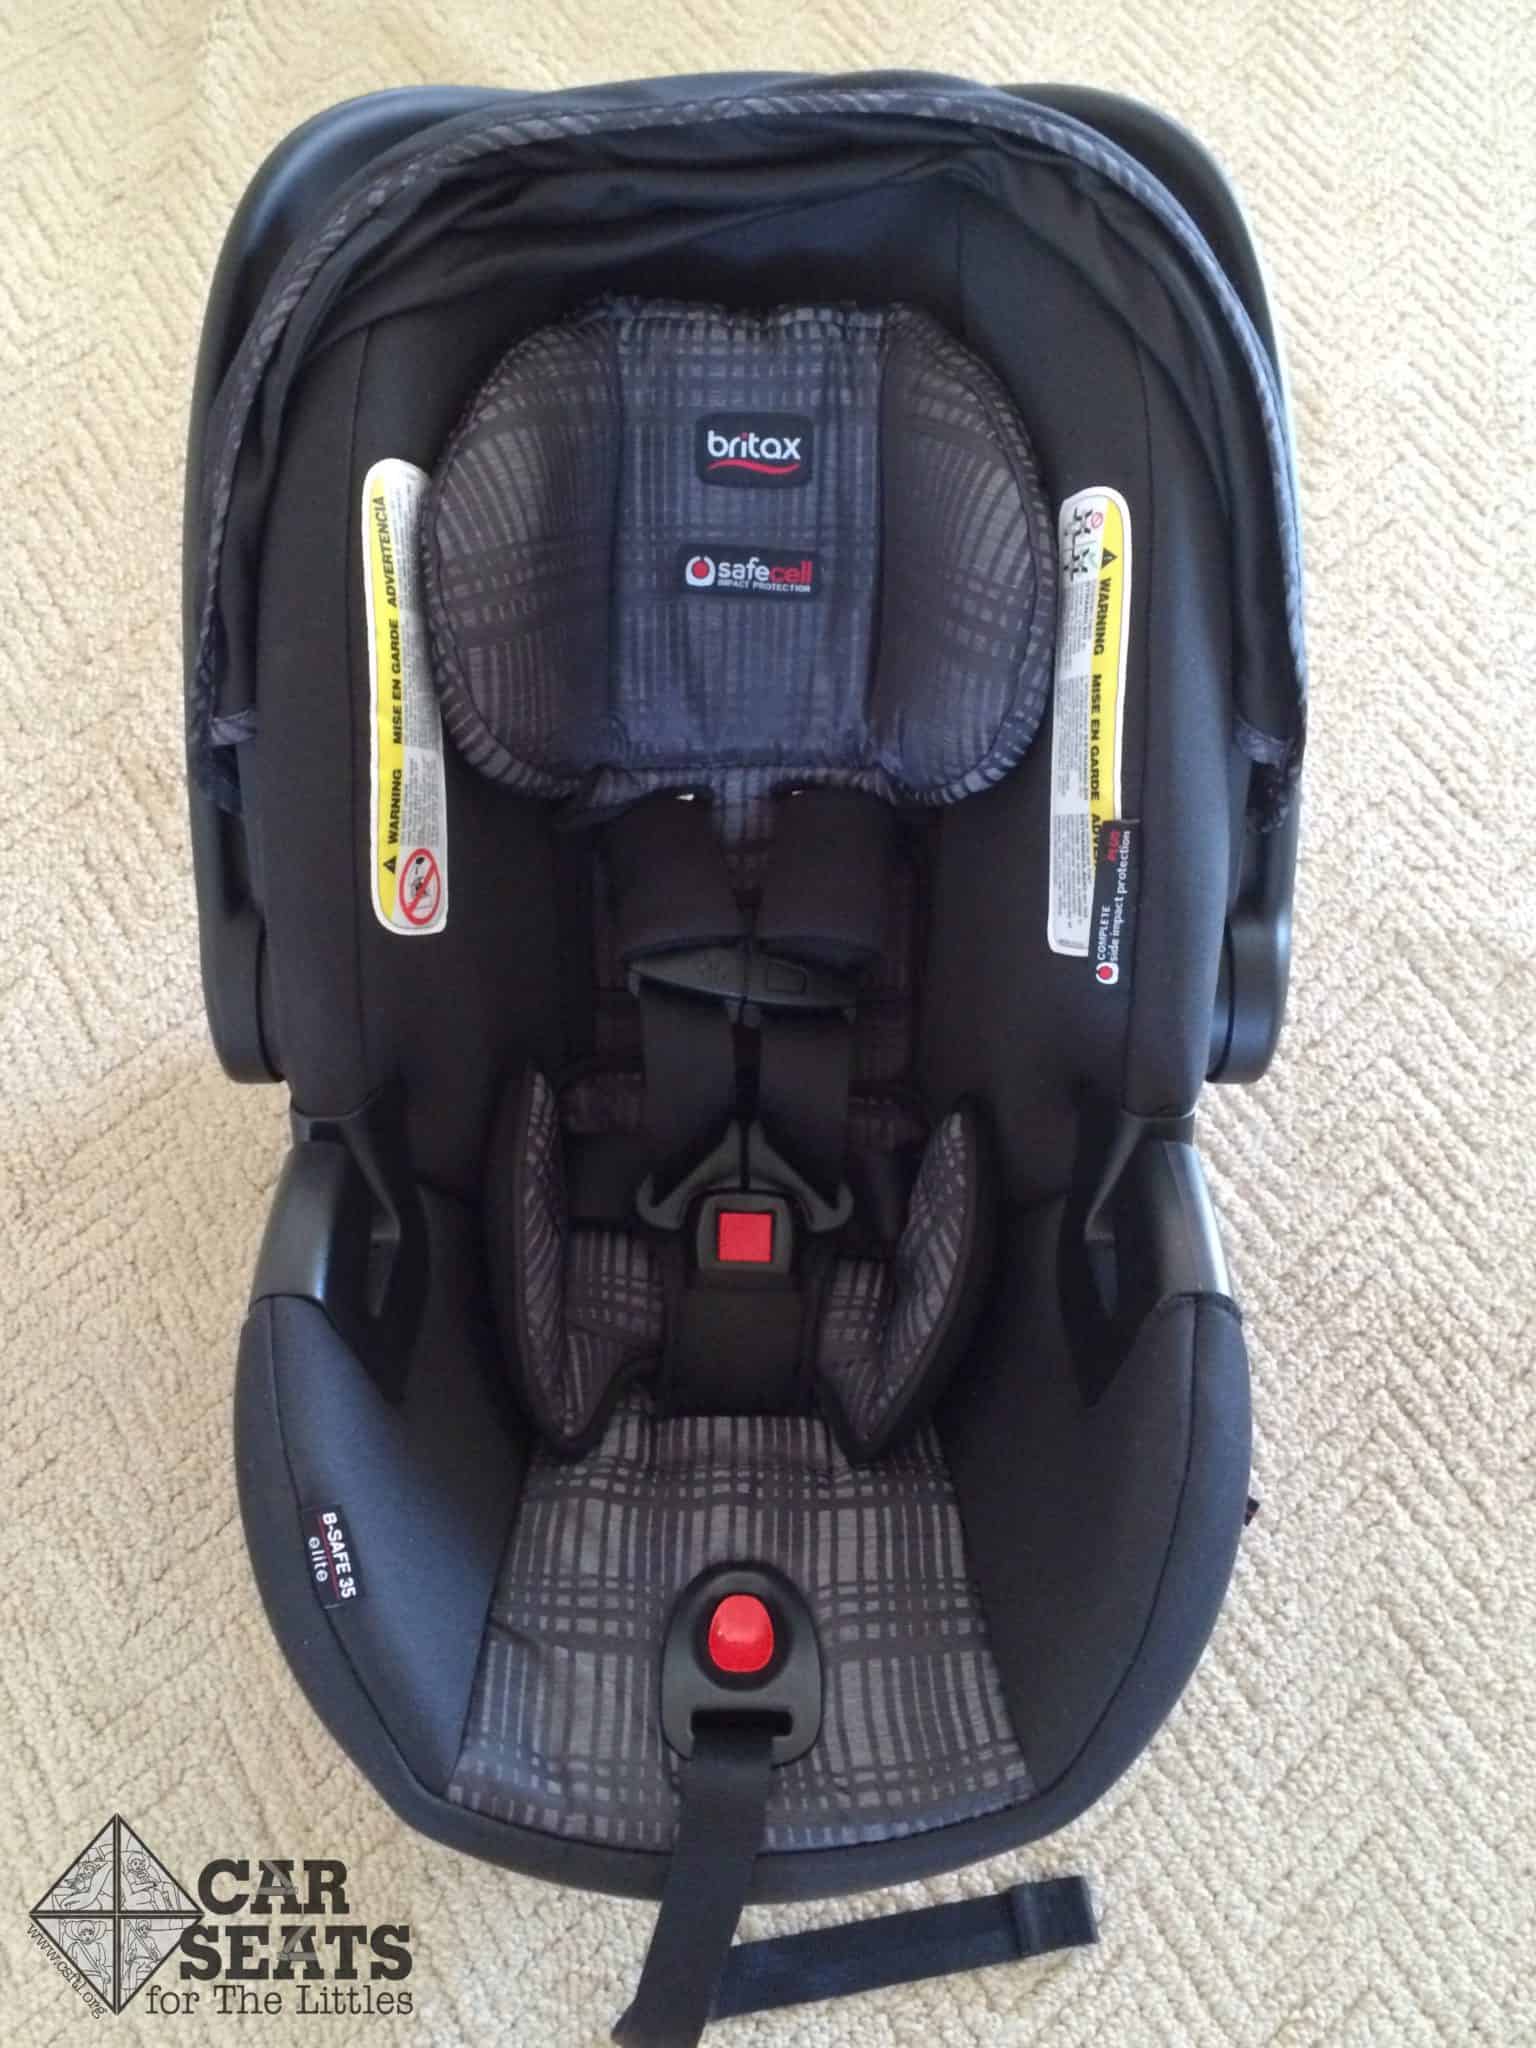 Britax B Safe 35 Elite Review Car Seats For The Littles - Britax Infant Car Seat Weight And Height Limit